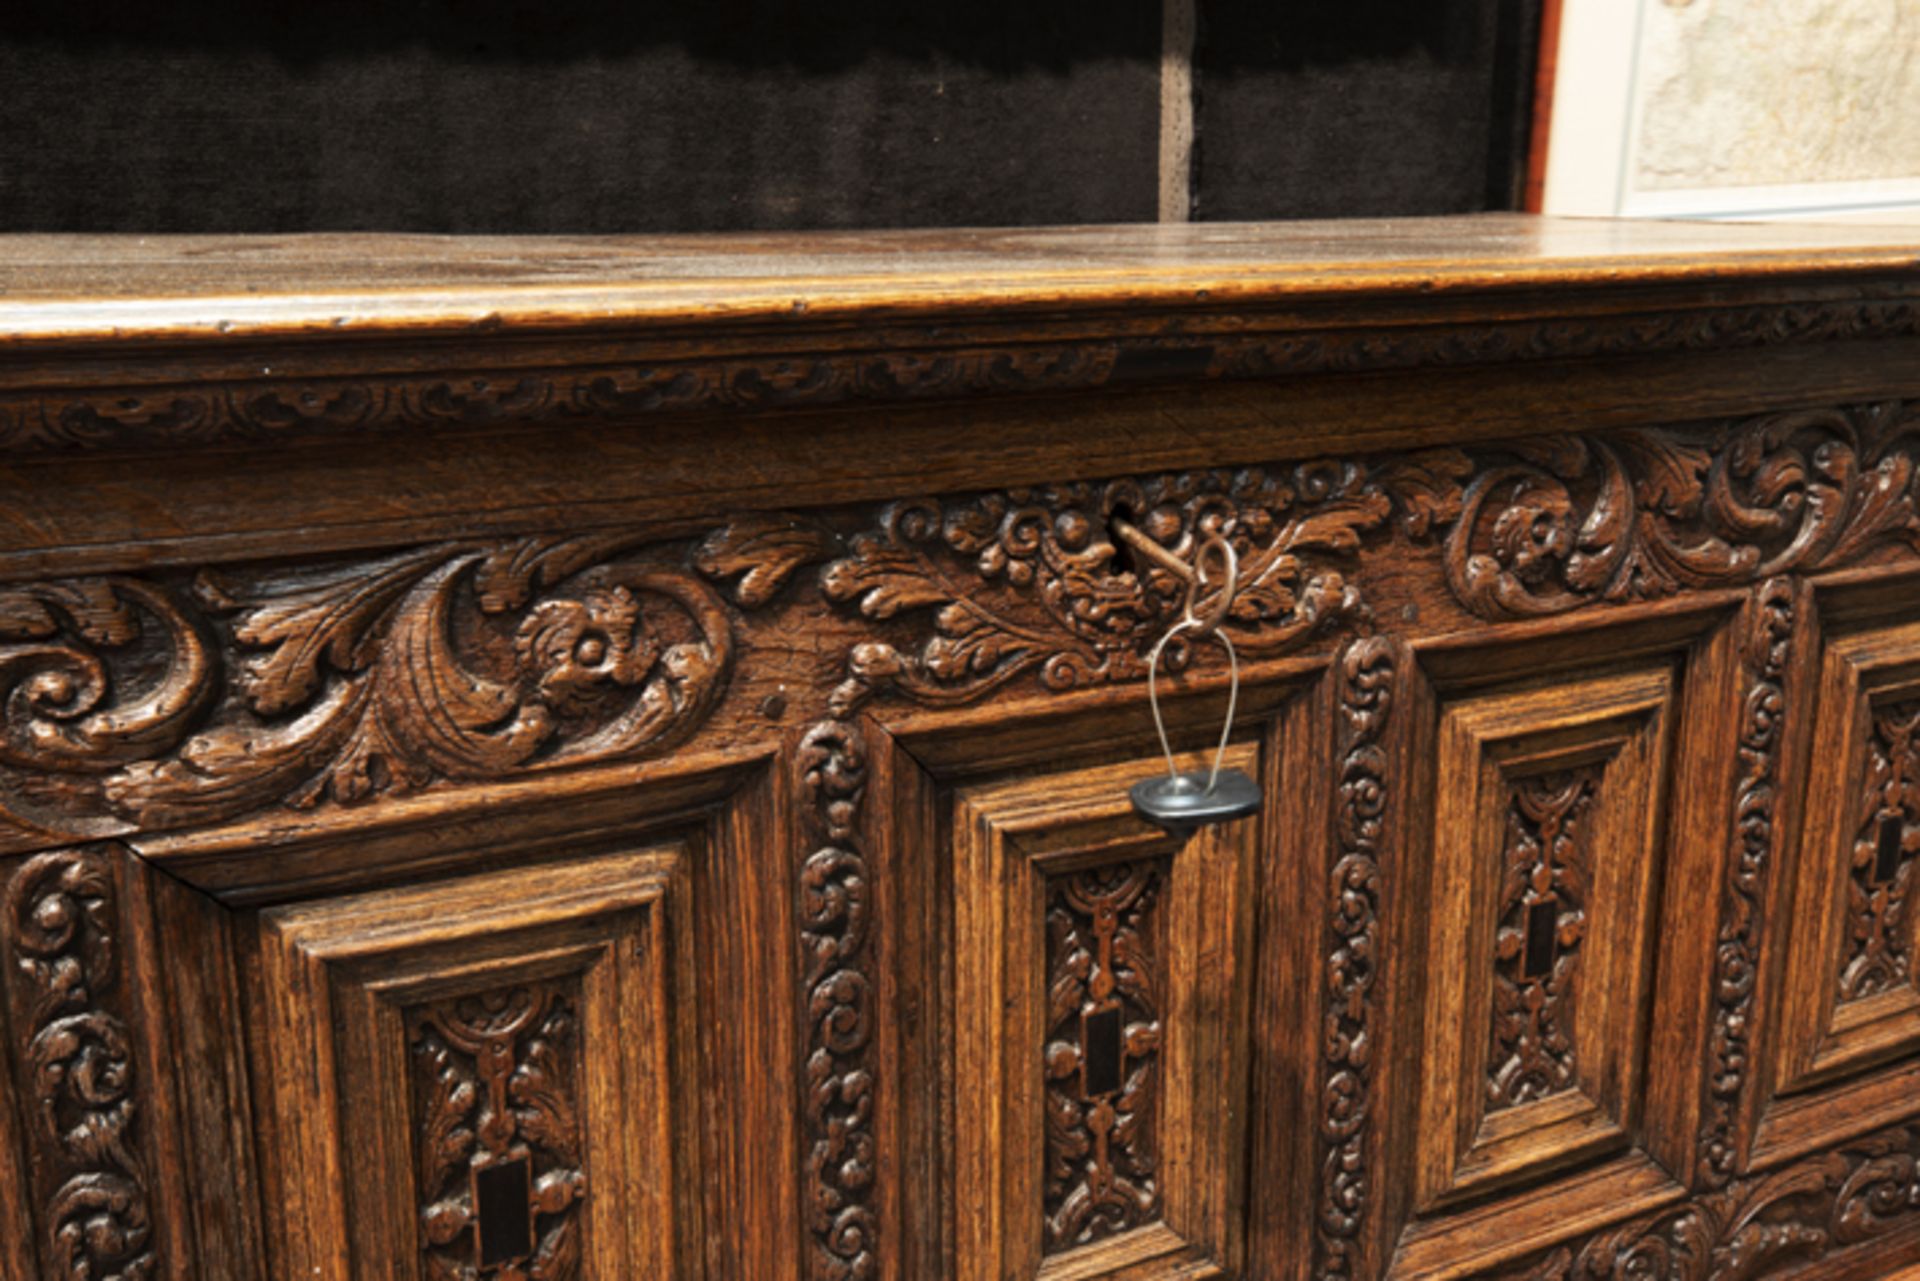 17th Cent. Renaissance style chest in oak and ebony adorned with finely sculpted panels - Bild 3 aus 3